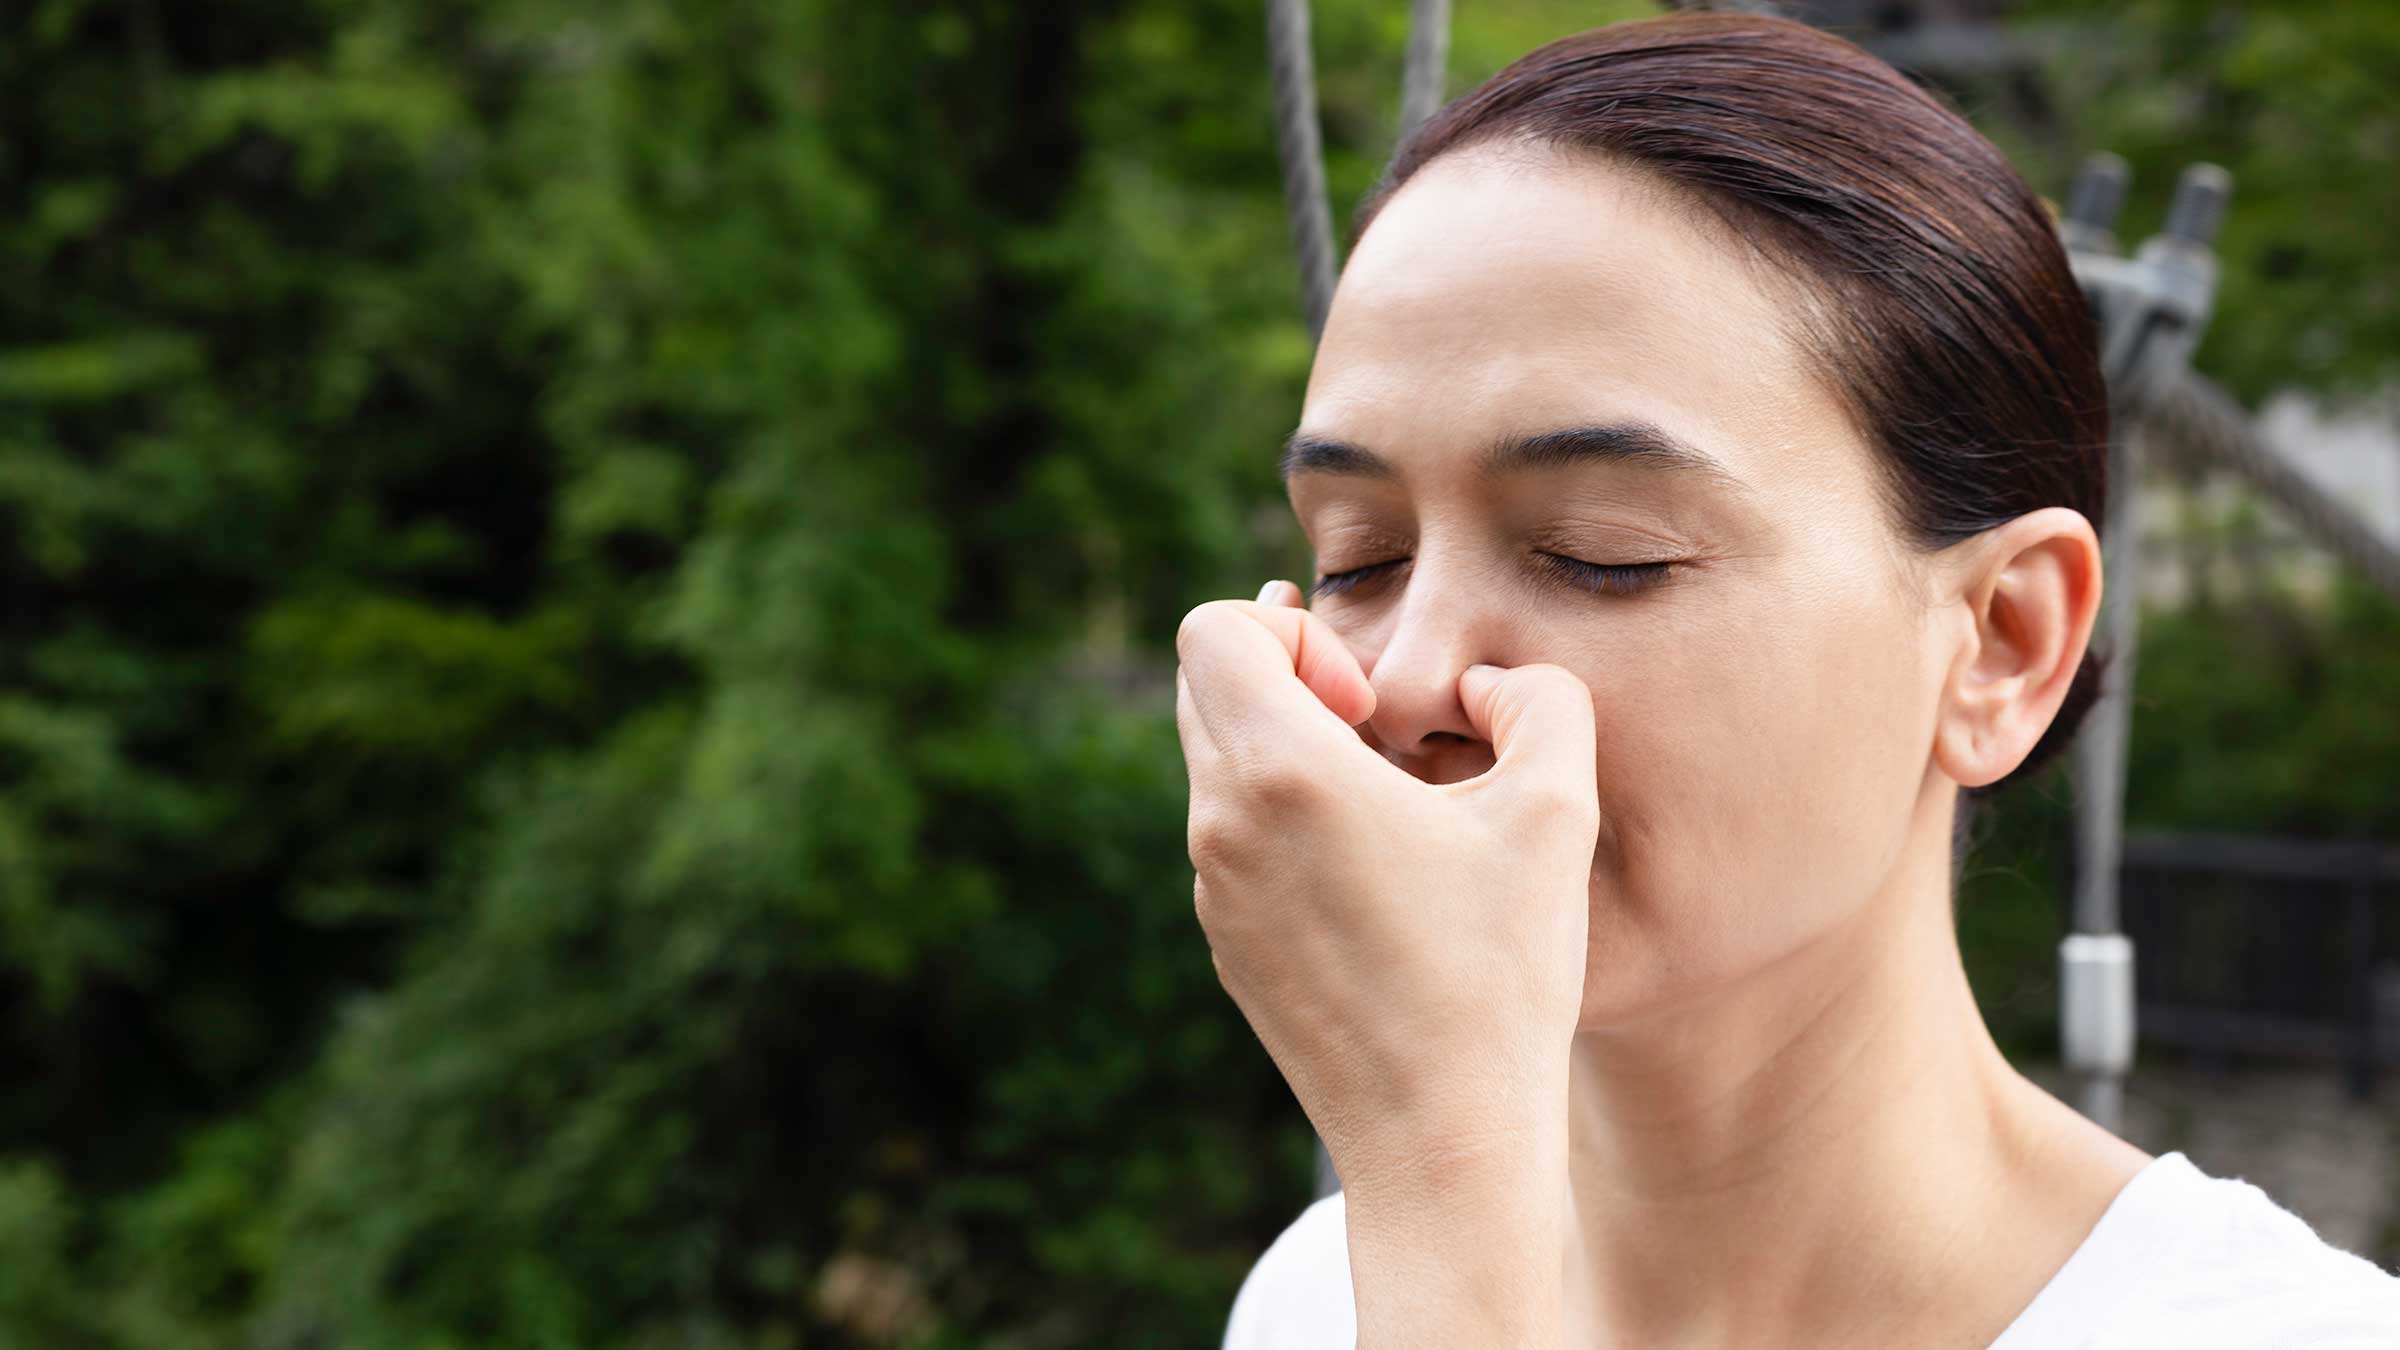 Can pranayama breathing exercises really help my stress and anxiety?